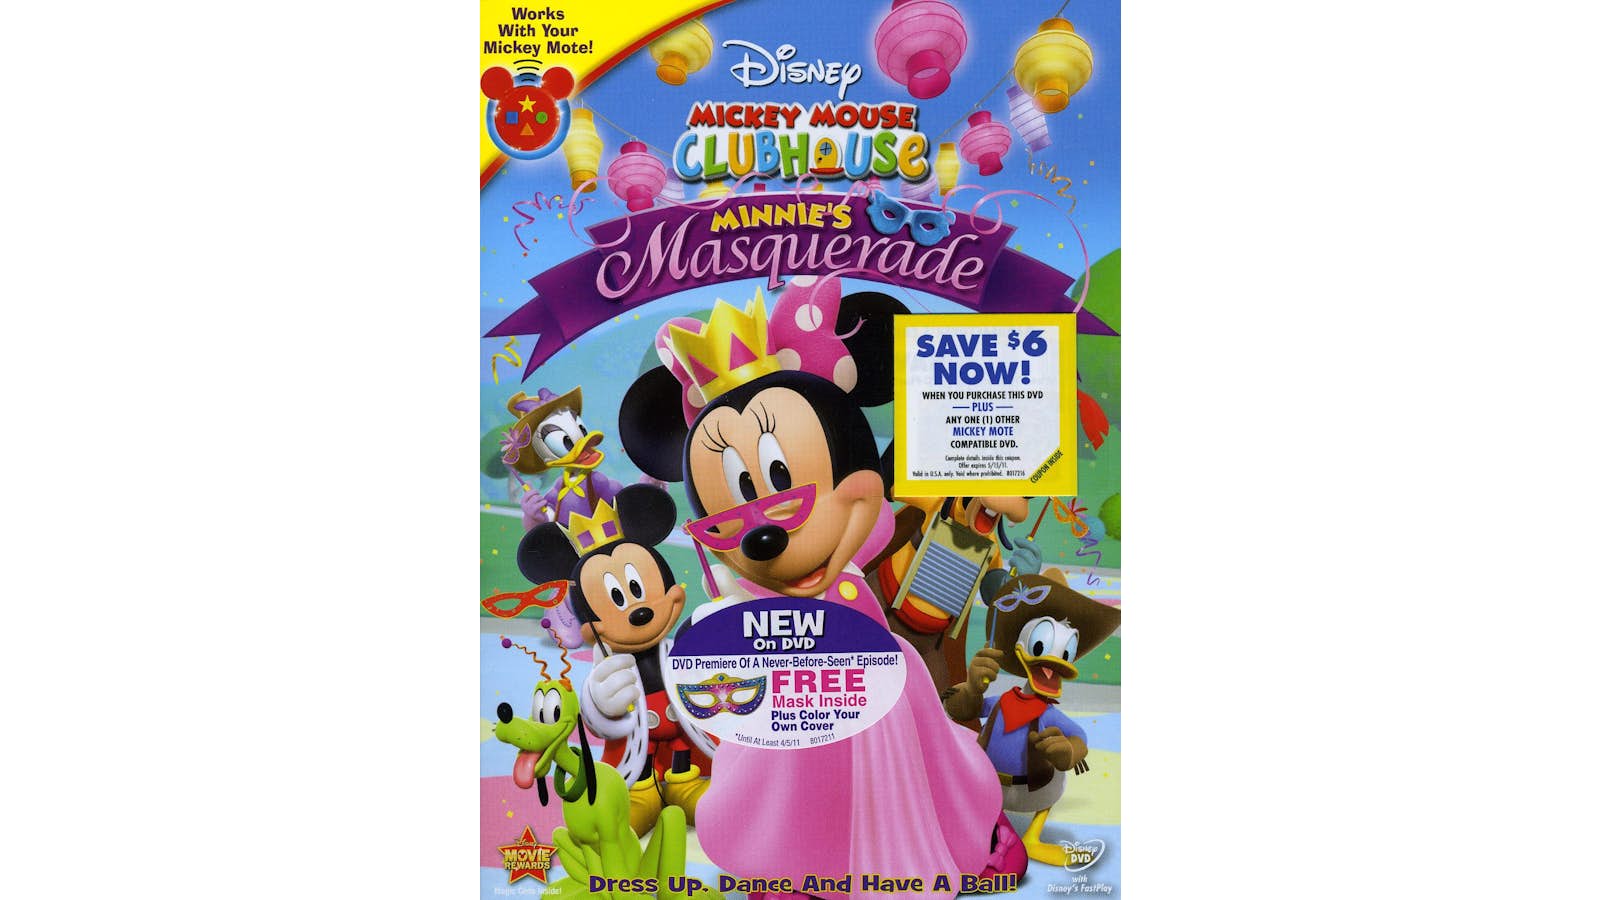 Mickey Mouse Clubhouse: Mickey's Storybook Surprises by MICKEY MOUSE  CLUBHOUSE / (FULL), DVD